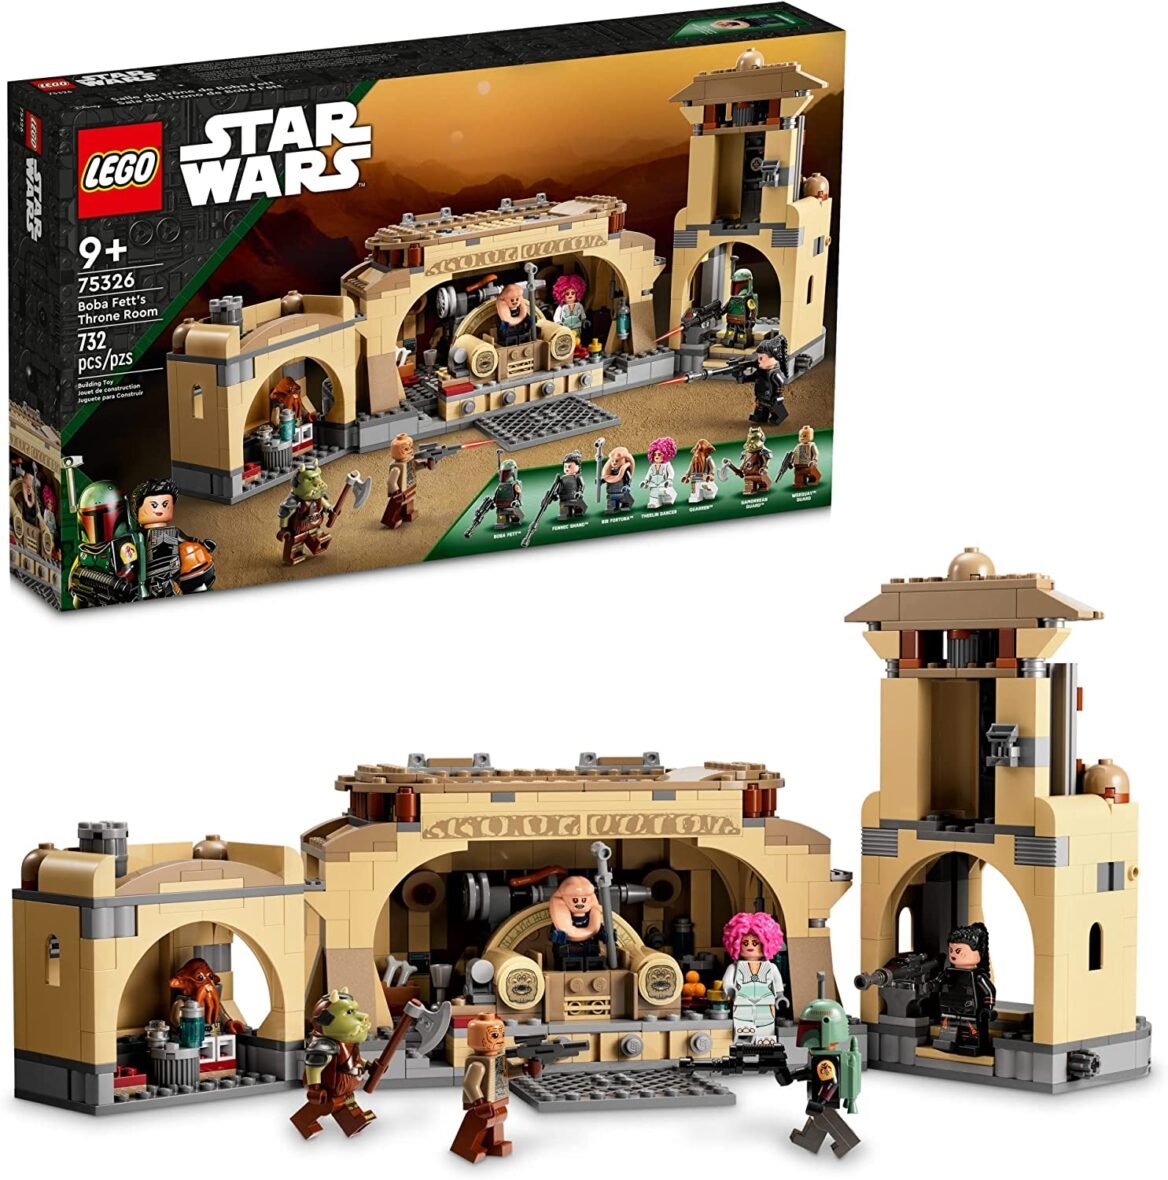 LEGO Star Wars Boba Fett’s Throne Room 75326 Building Kit, Featuring a Buildable Palace Model and 7 Star Wars: The Book of Boba Fett Characters (732 Pieces)